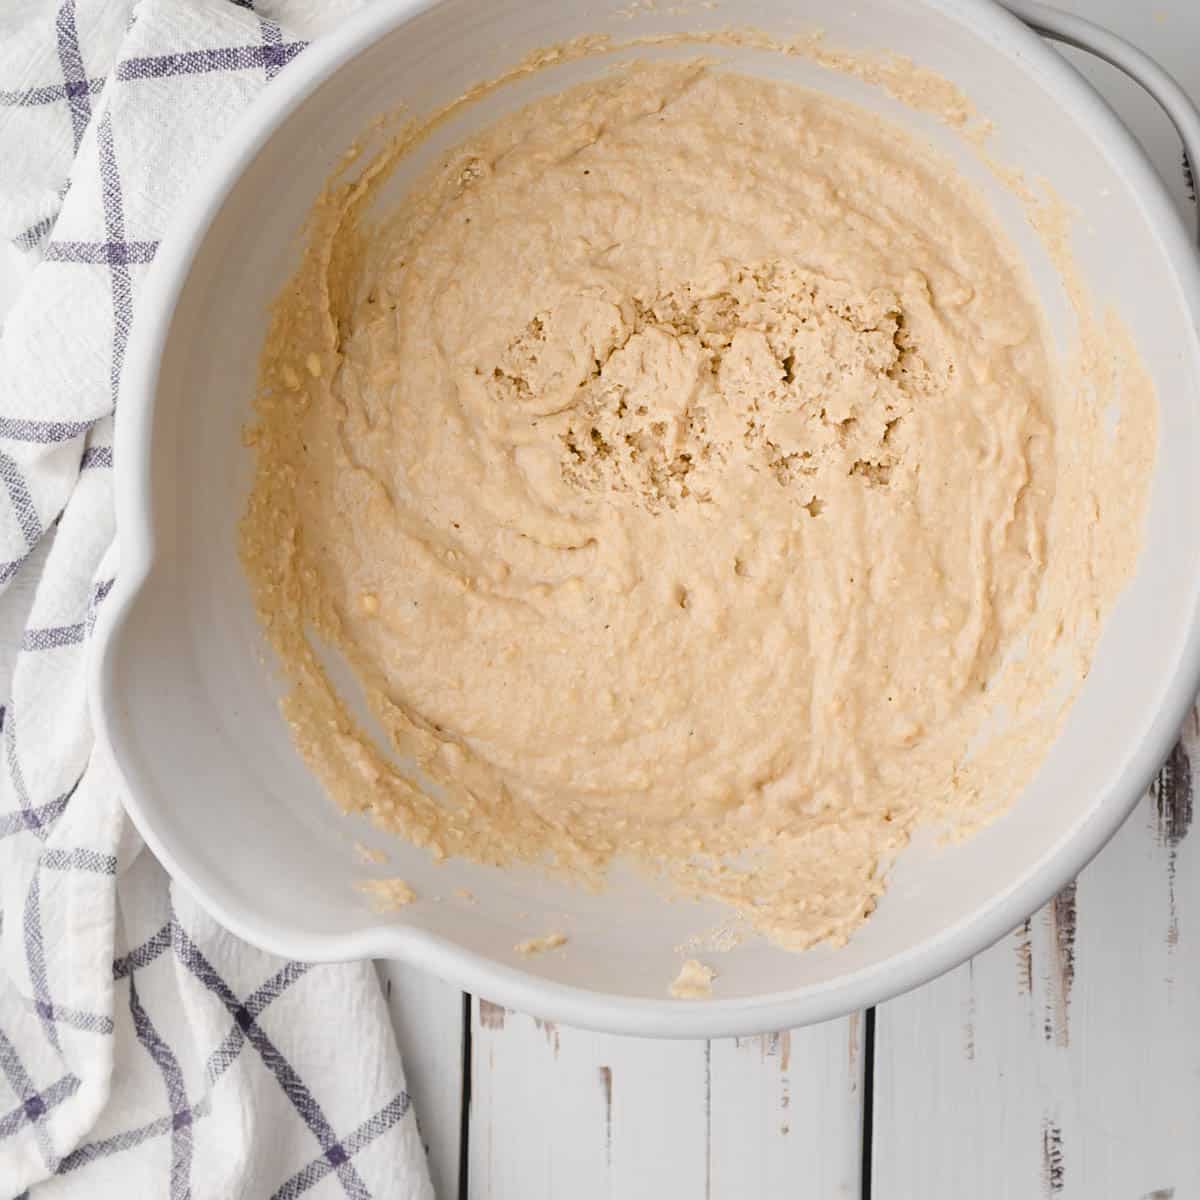 oat flour biscuit dough in a bowl